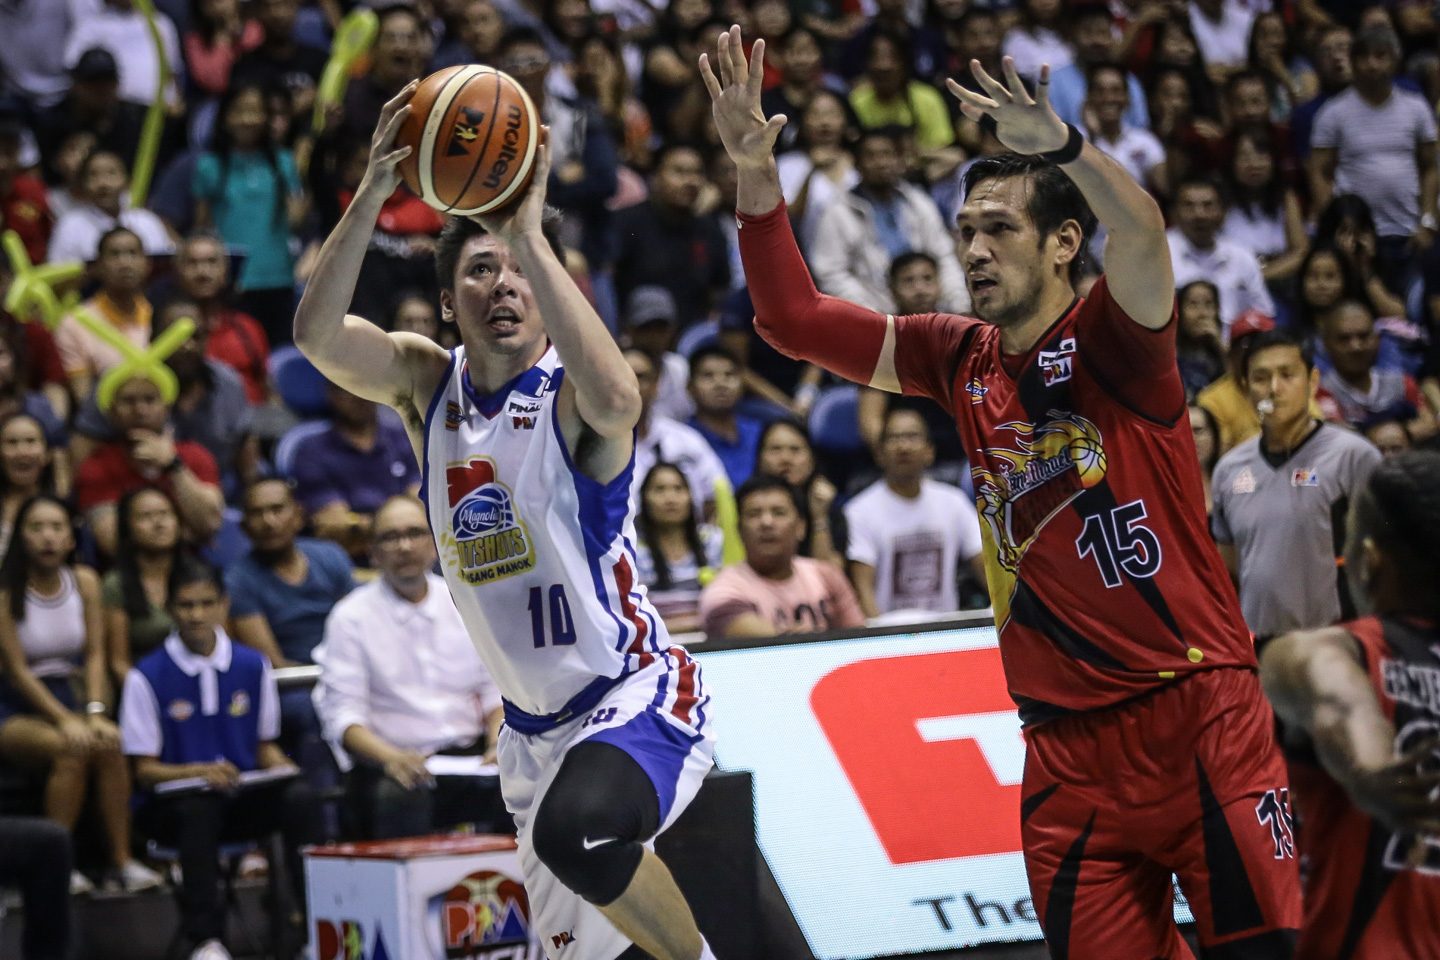 Magnolia bags Game 1 of PH Cup finals with comeback win vs San Miguel